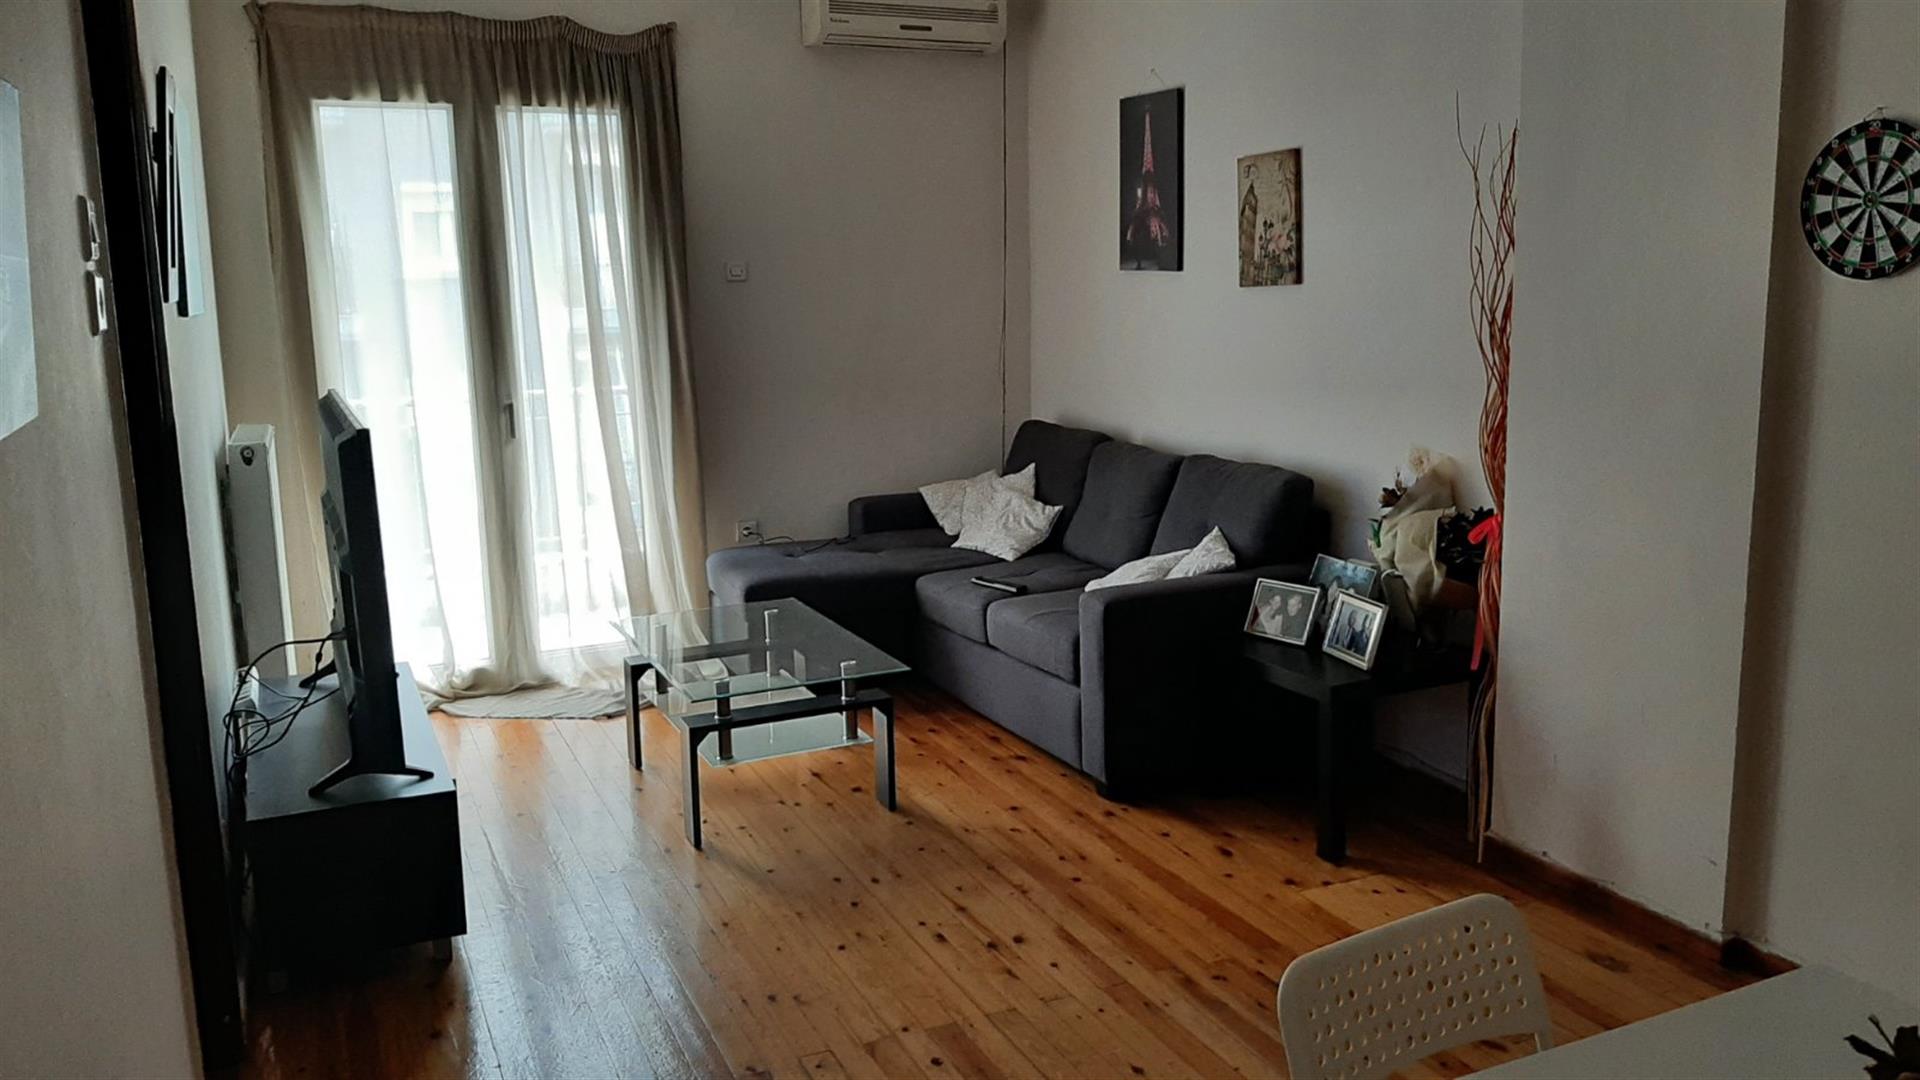 University Of Thessaloniki On Papanastasiou Frontage apartment 75 sq.m. For sale. 3Rd floor